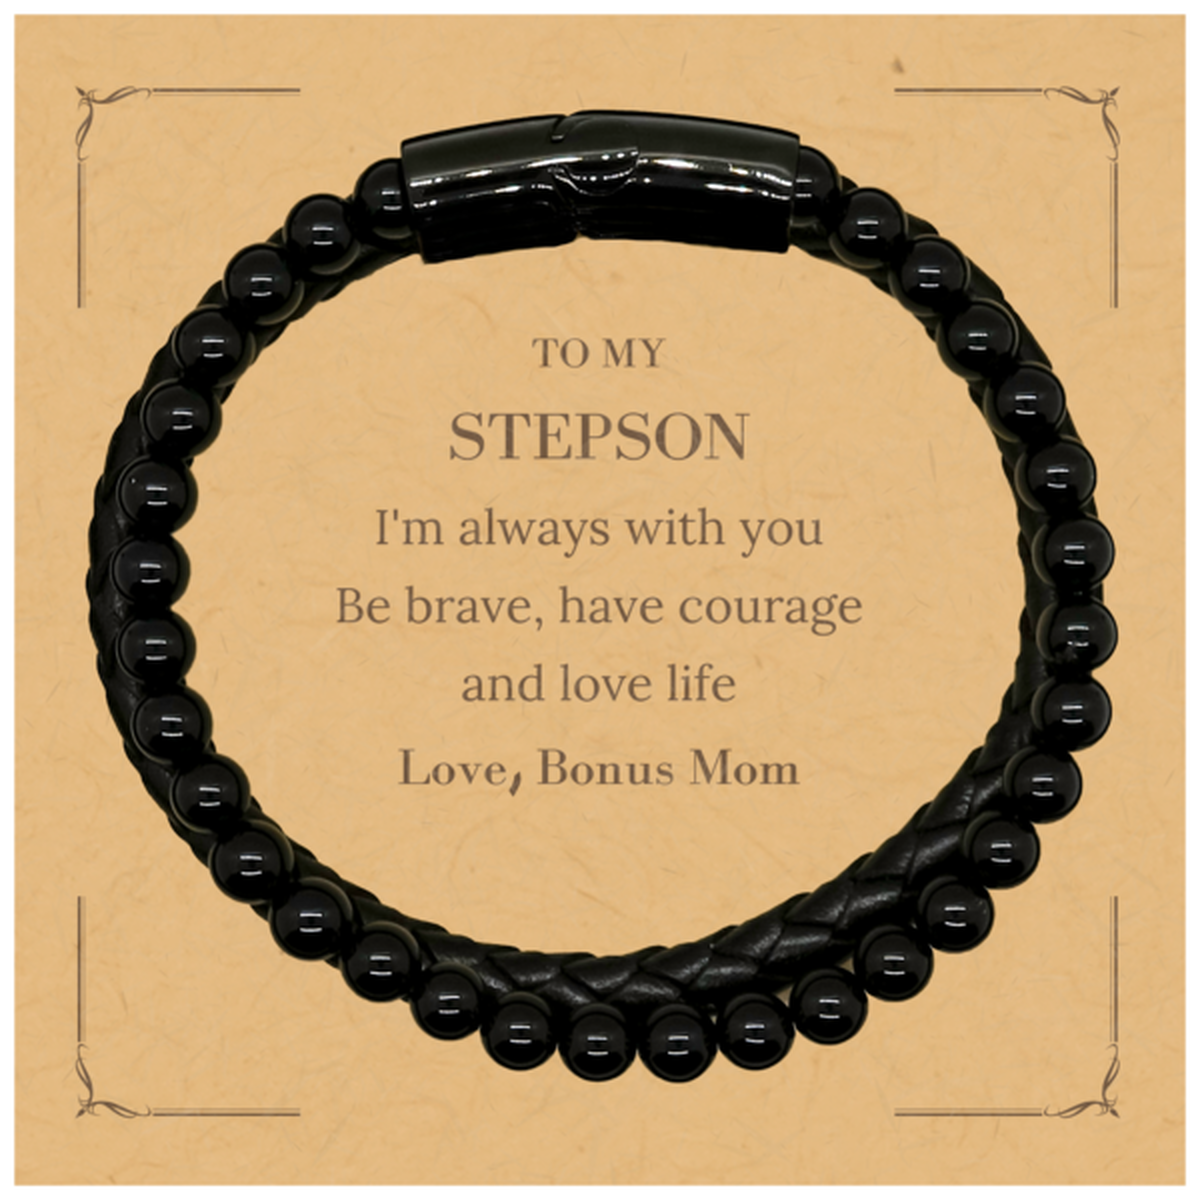 To My Stepson Gifts from Bonus Mom, Unique Stone Leather Bracelets Inspirational Christmas Birthday Graduation Gifts for Stepson I'm always with you. Be brave, have courage and love life. Love, Bonus Mom